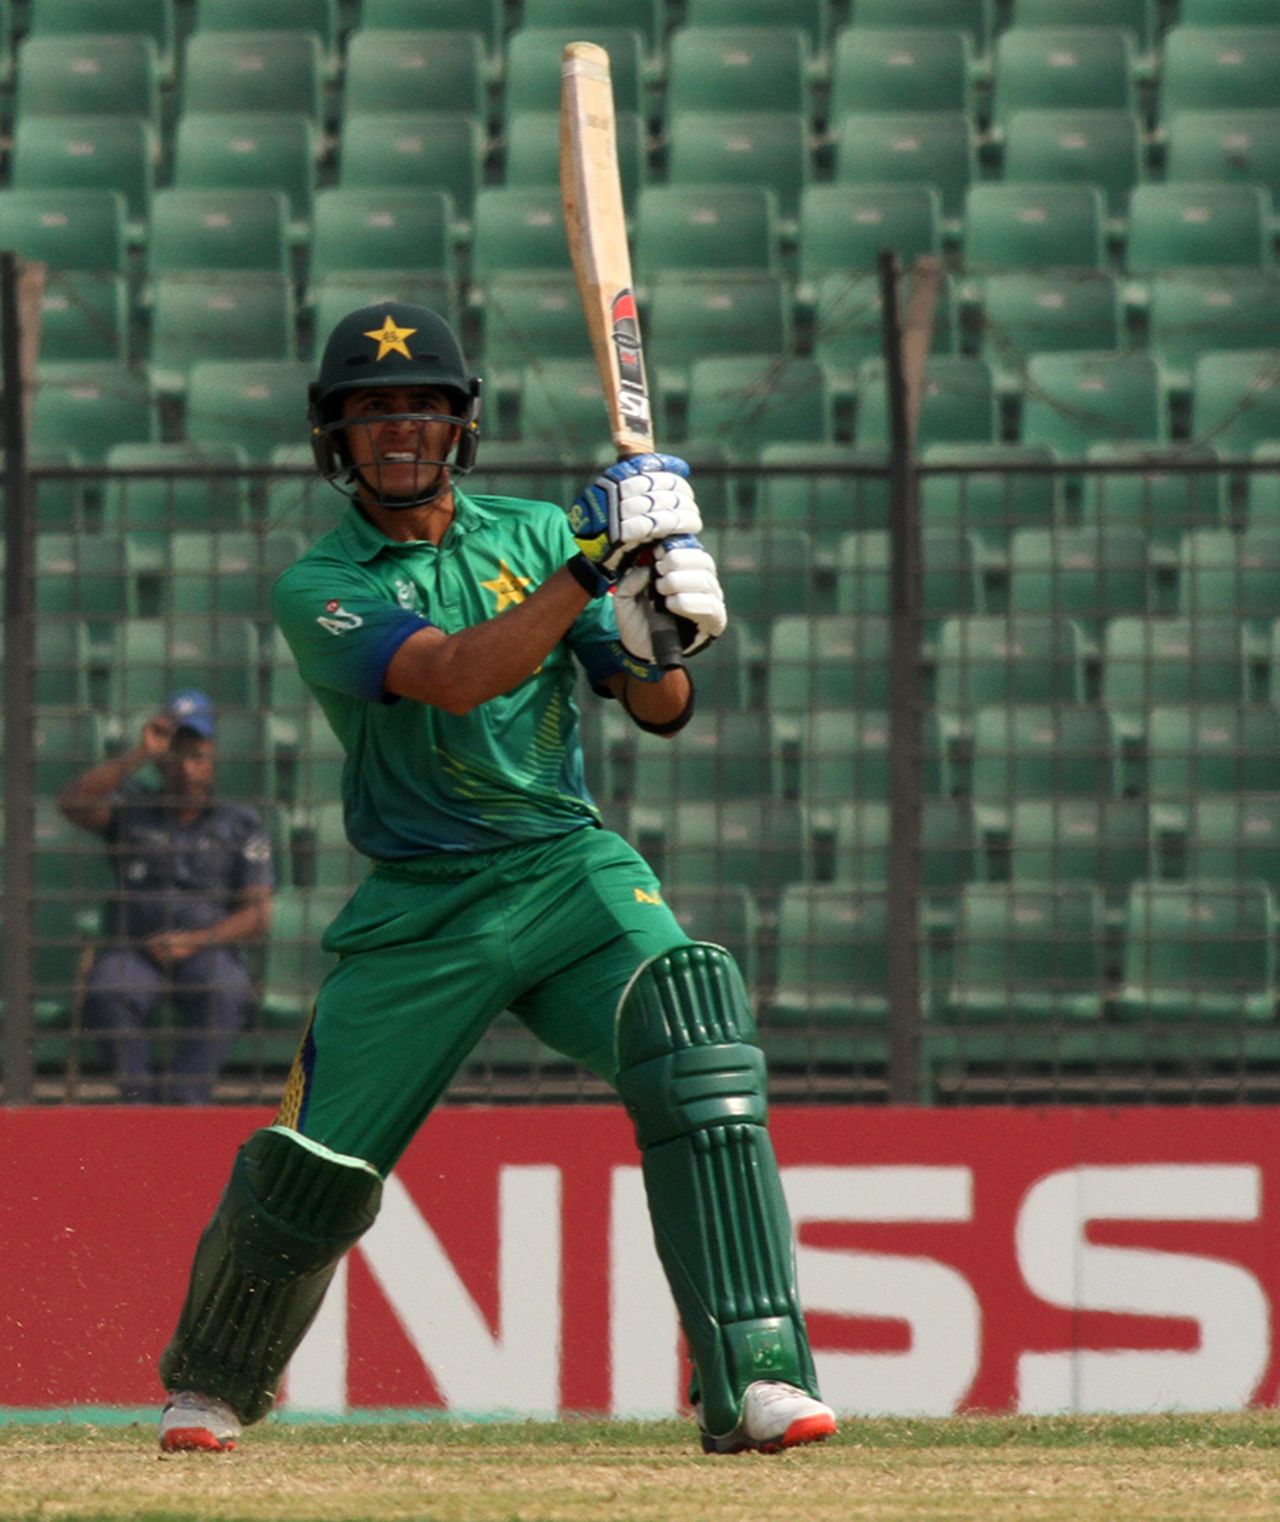 Umair Masood's 113 lifted Pakistan Under-19s after an early collapse, Pakistan v West Indies, Under-19 World Cup 2016, quarter-final, Fatullah, February 8, 2016